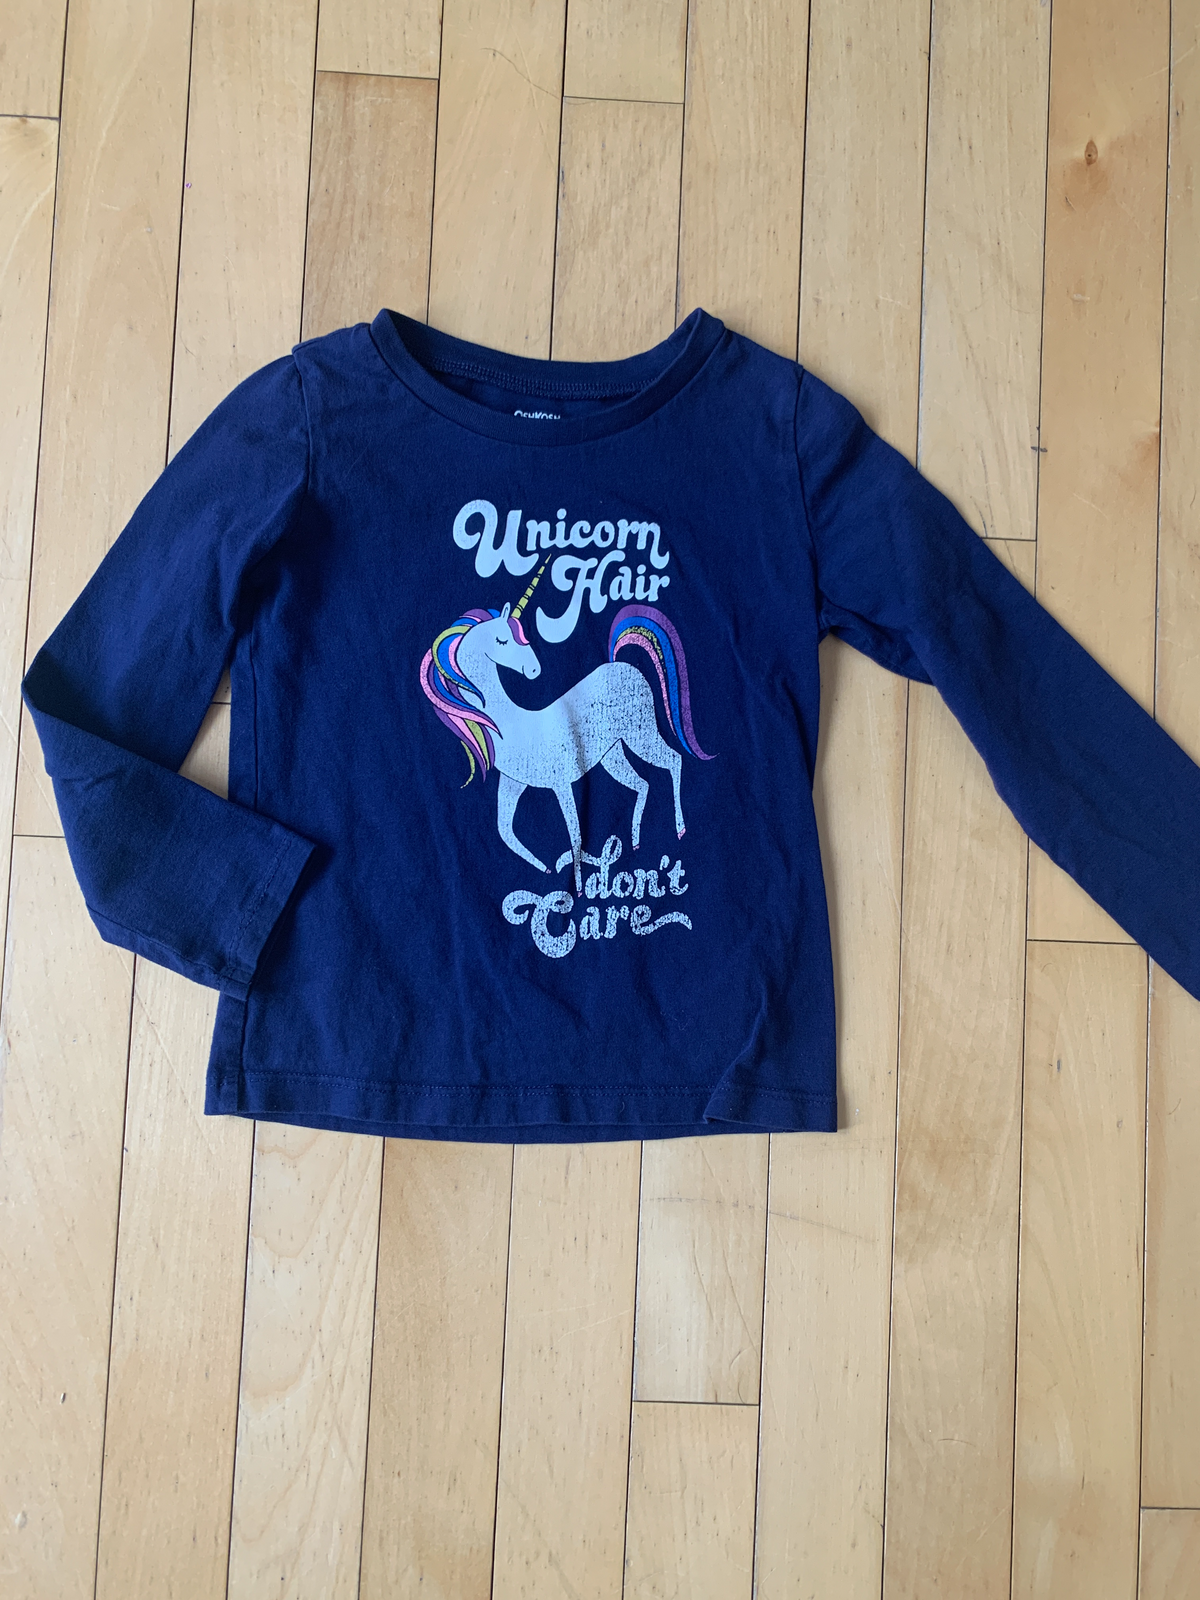 Long Sleeve Graphic Top (Girls Size 3)